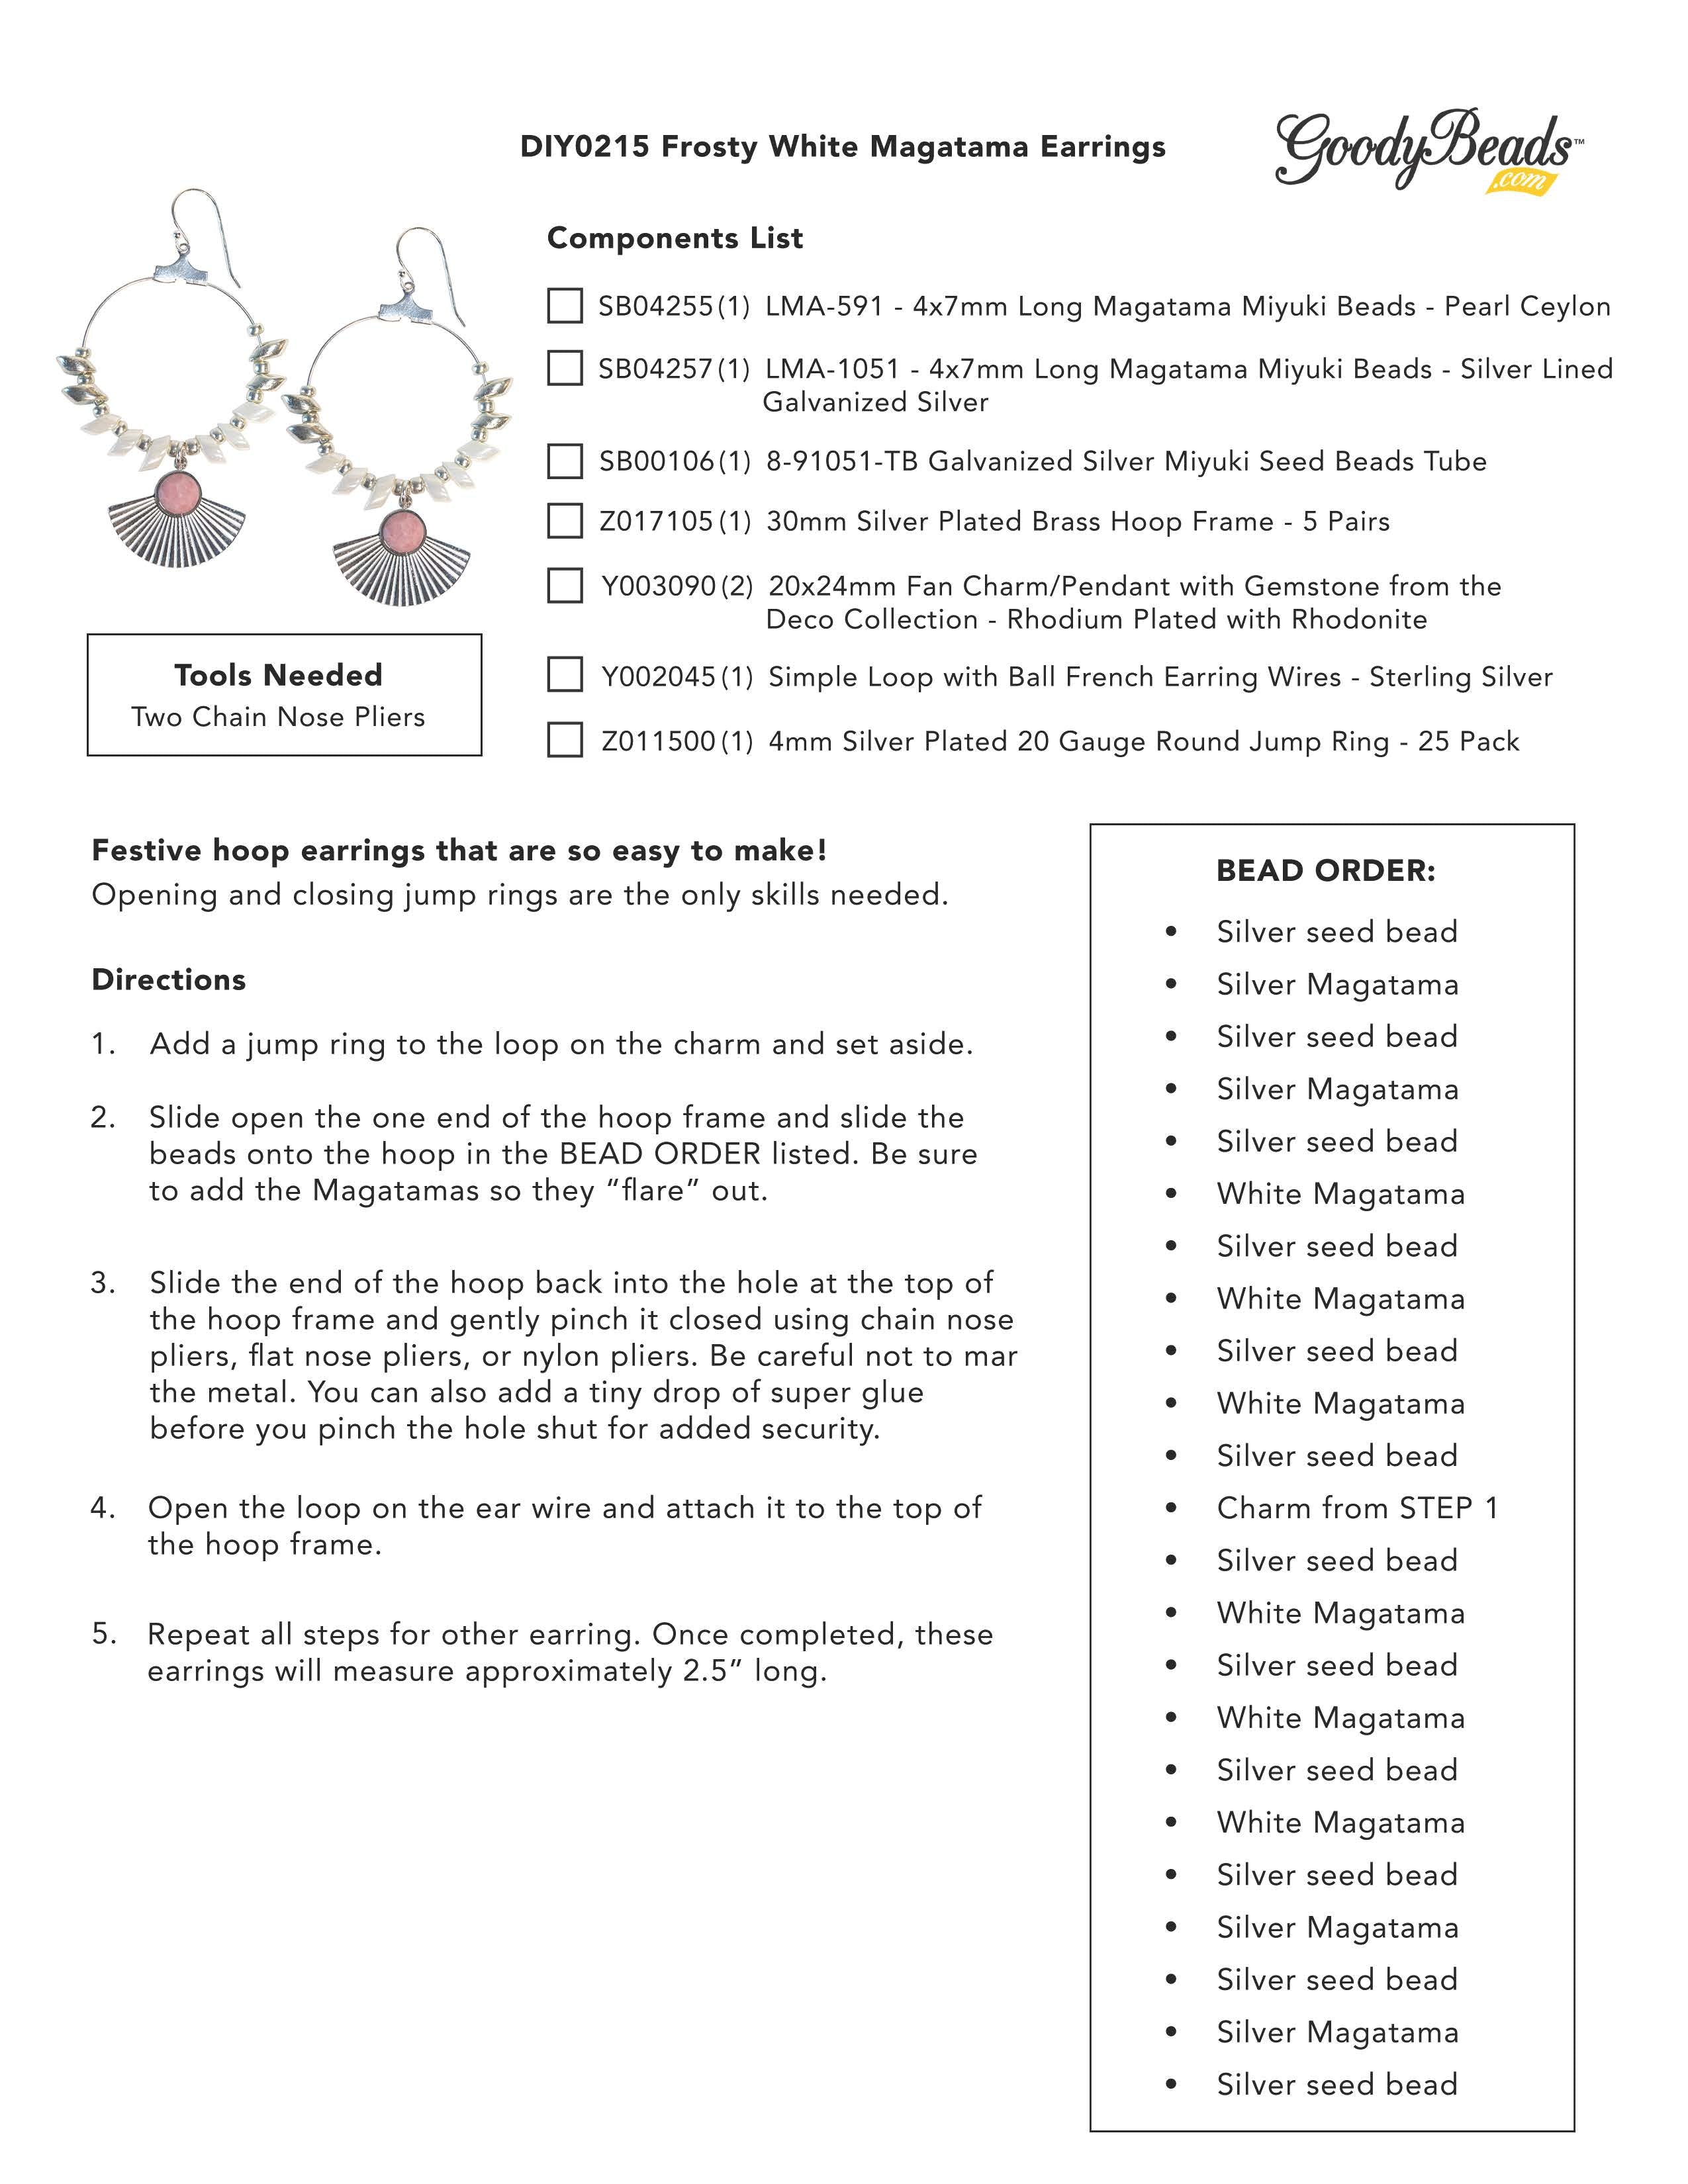 INSTRUCTIONS for DIY0215 Frosty White Magatama Earrings